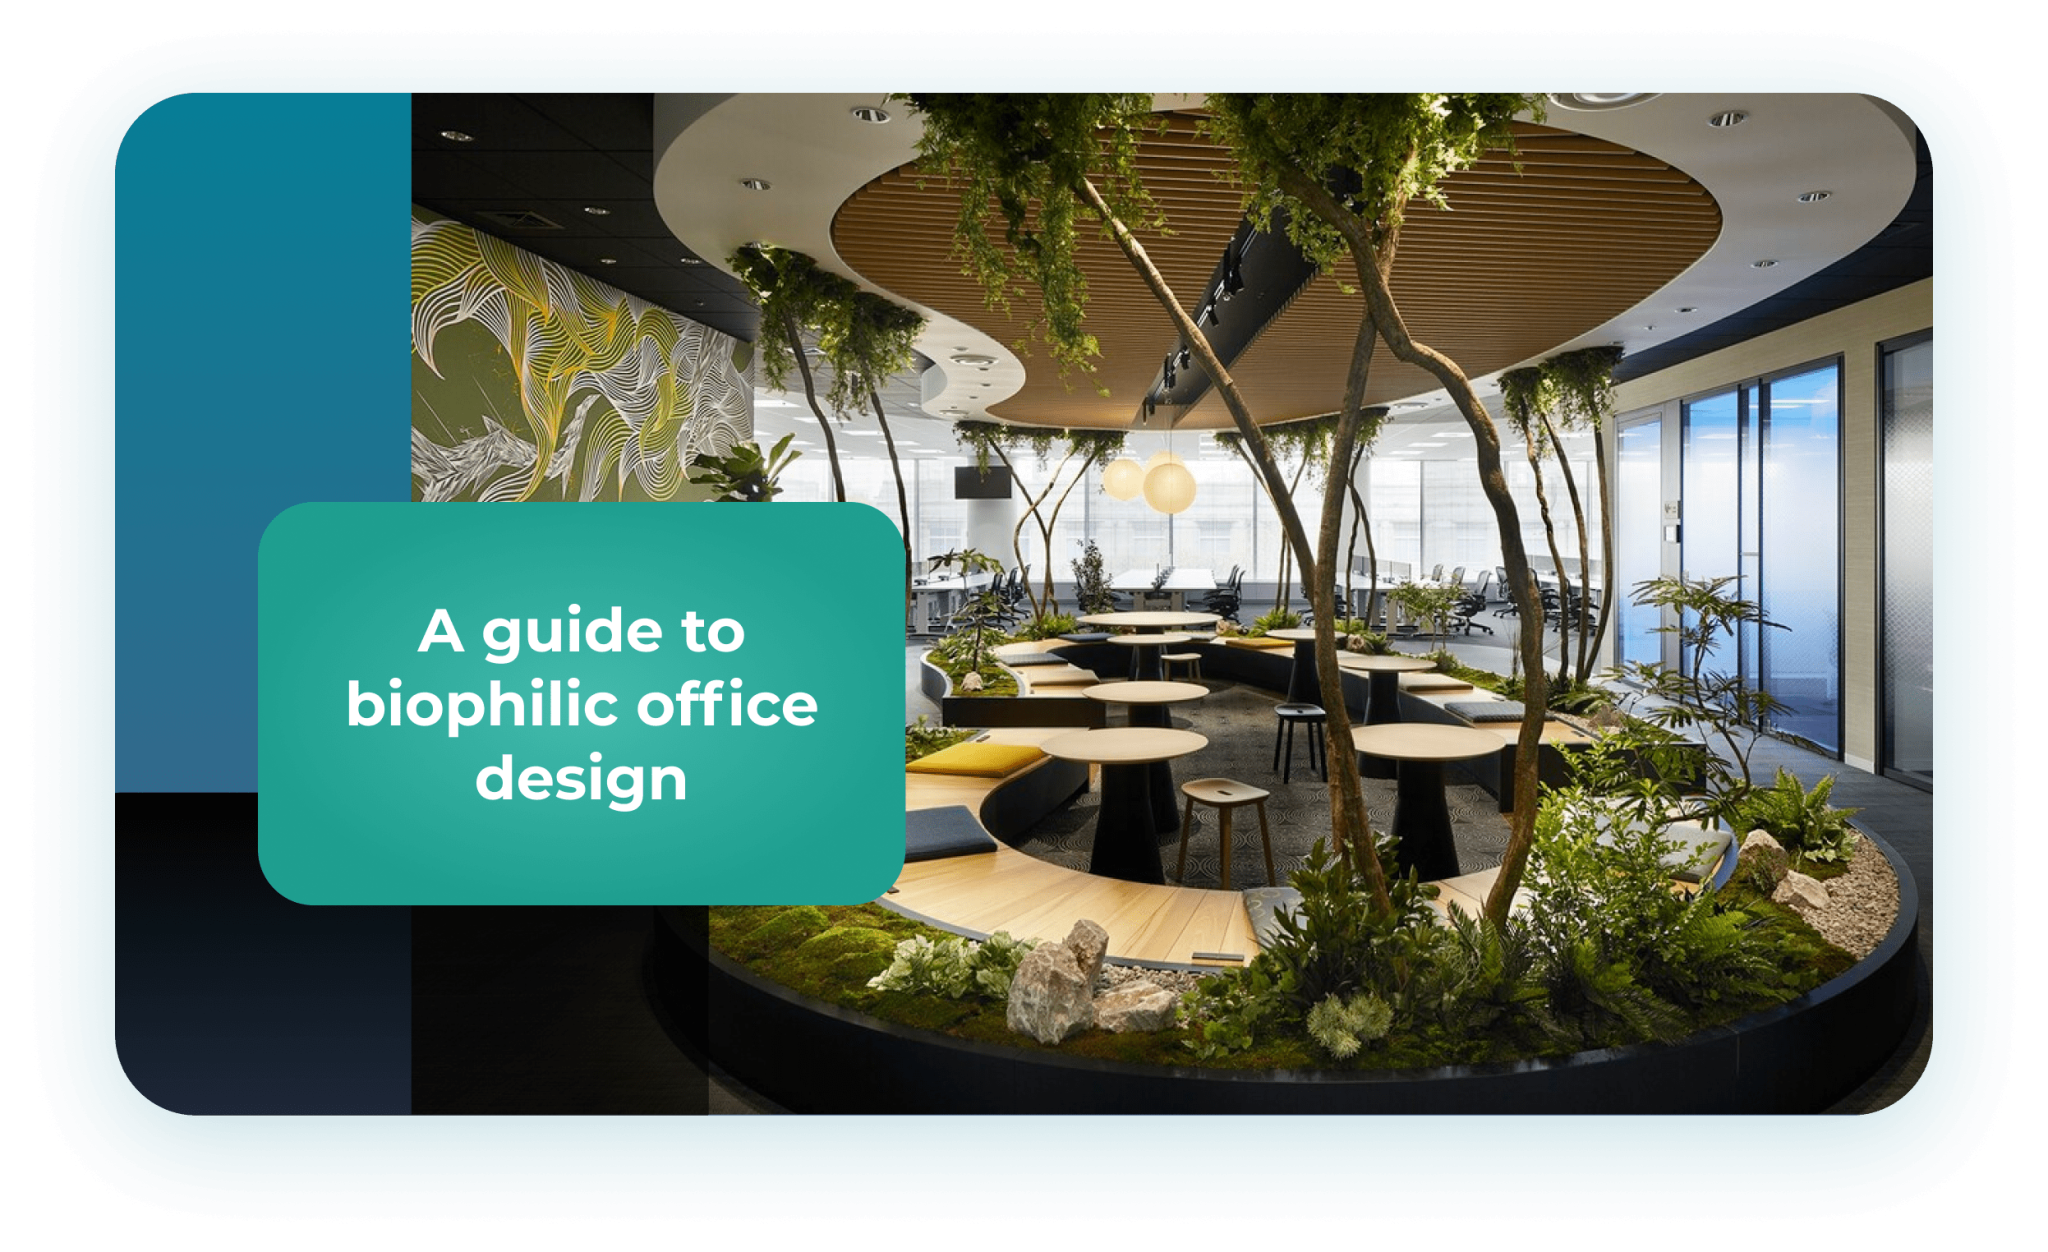 A guide to biophilic office design